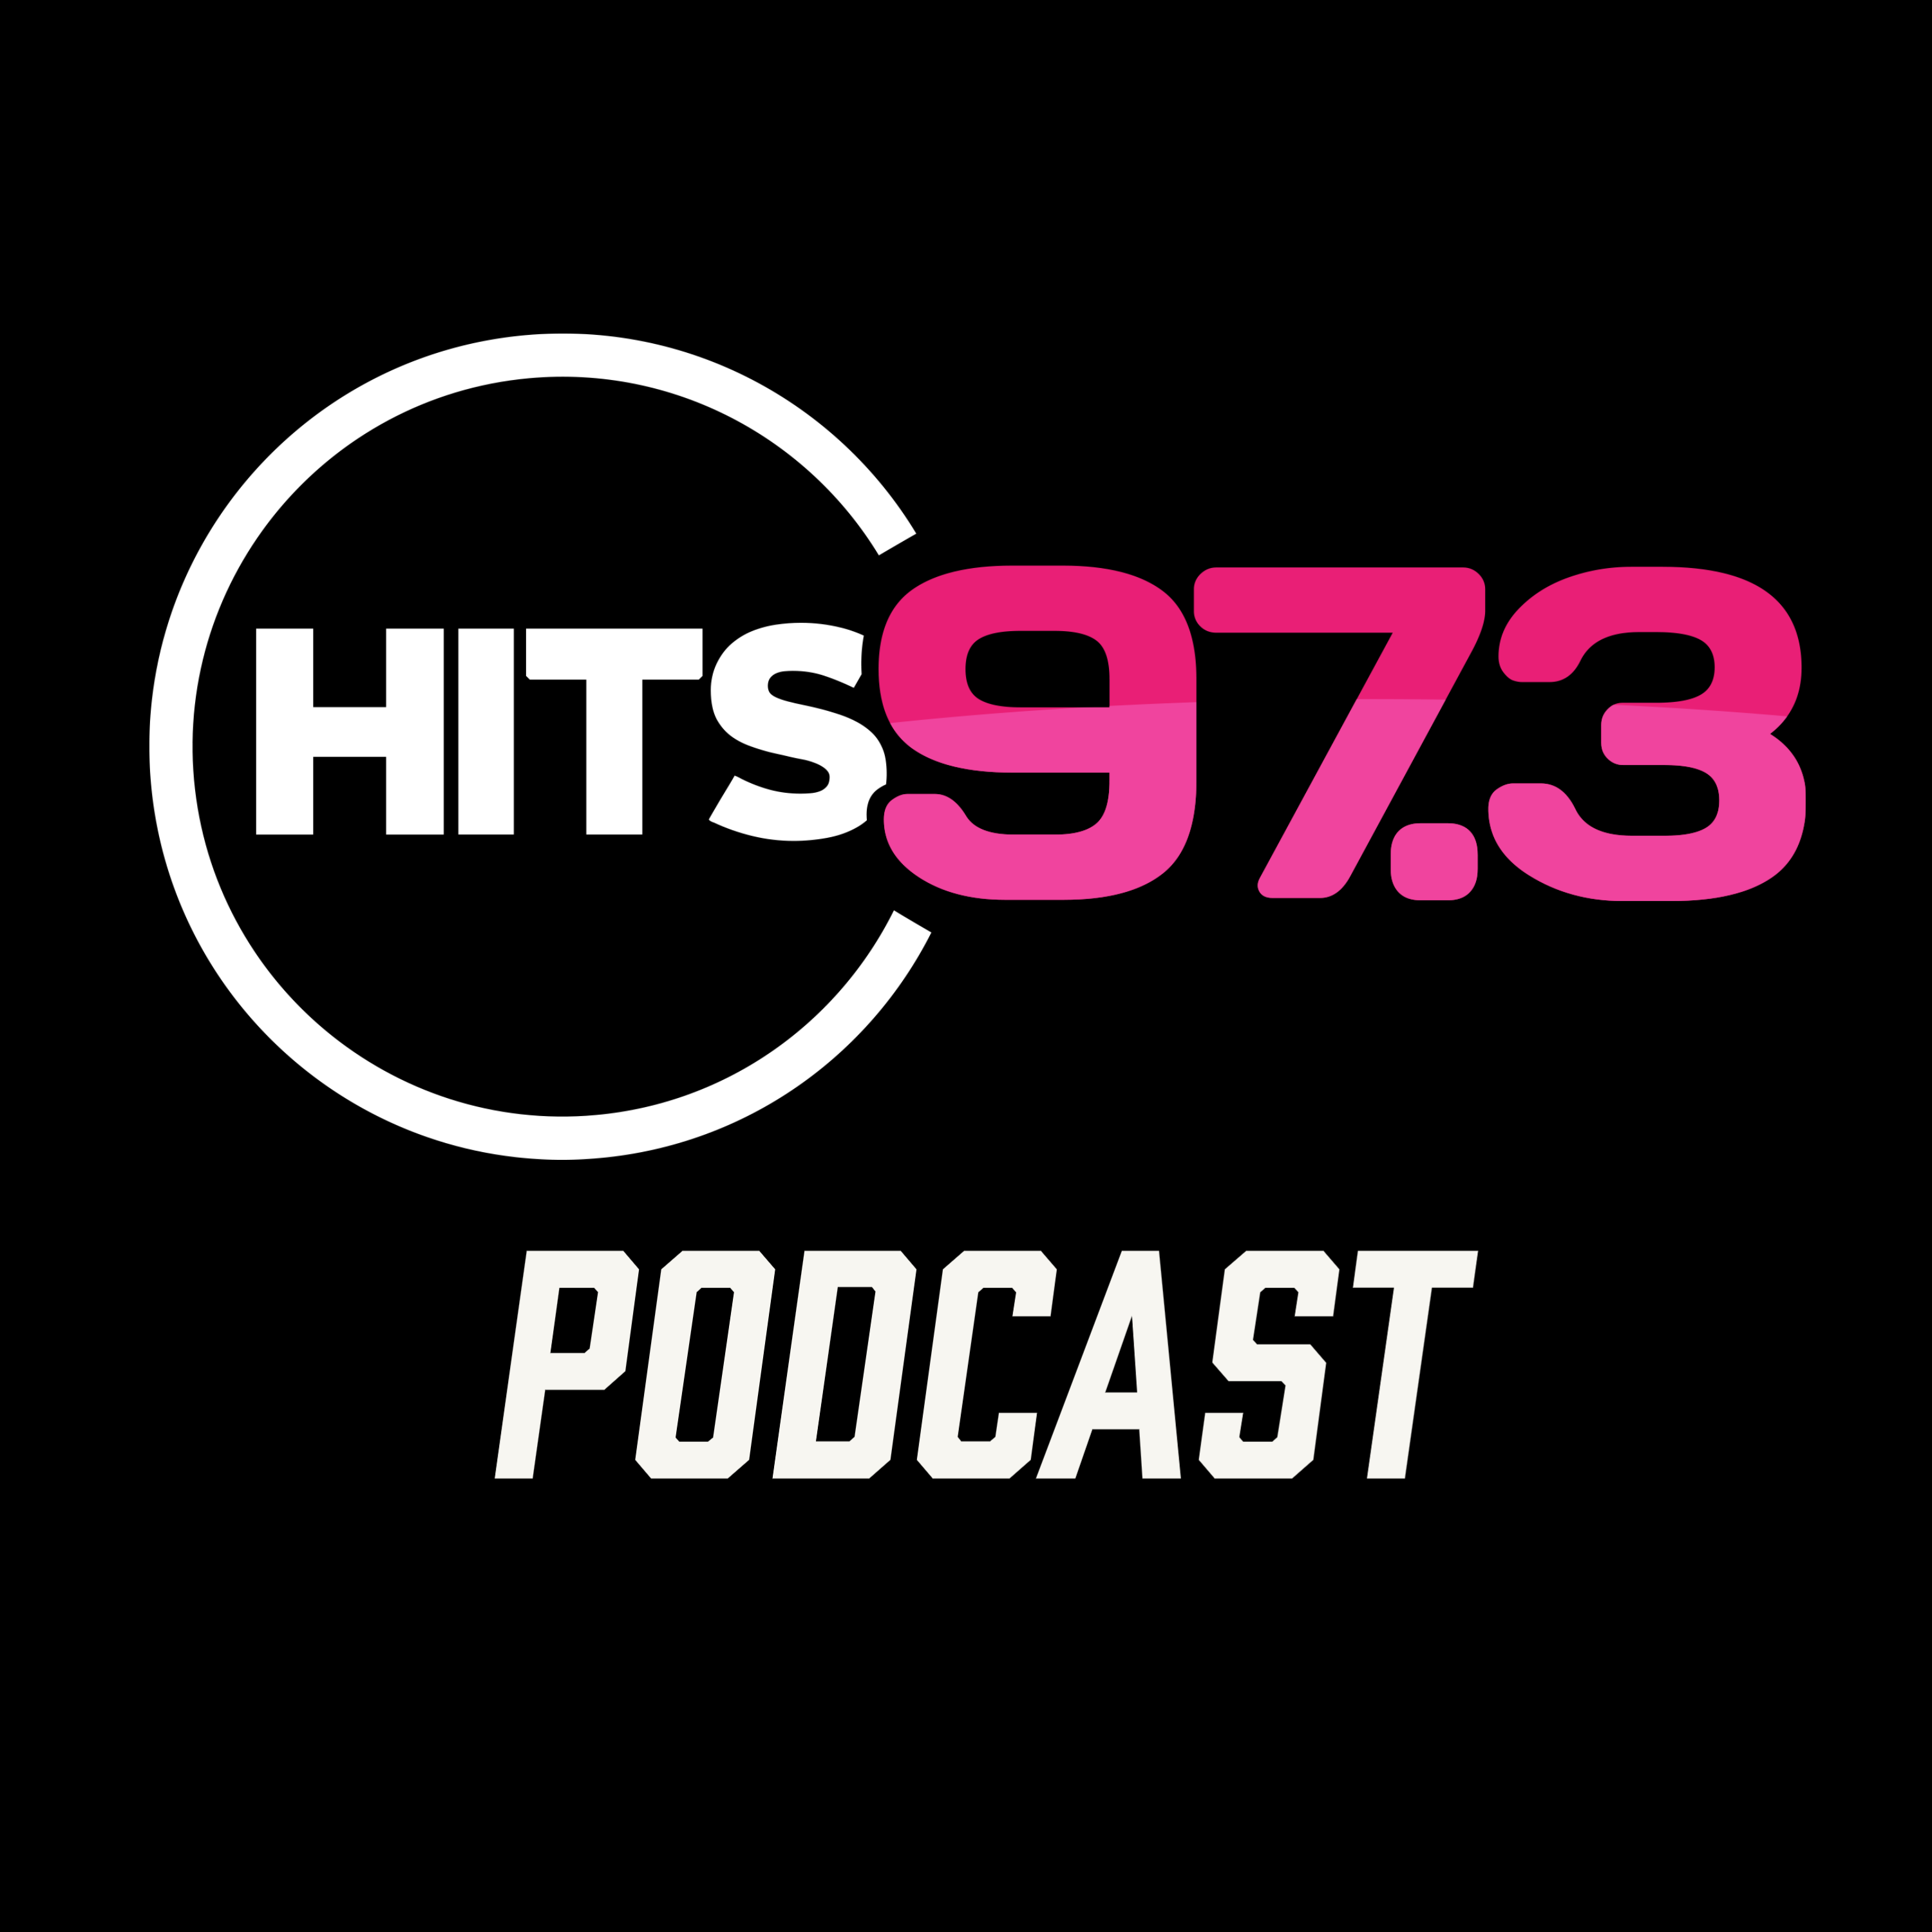 The Hits 97.3 Podcast